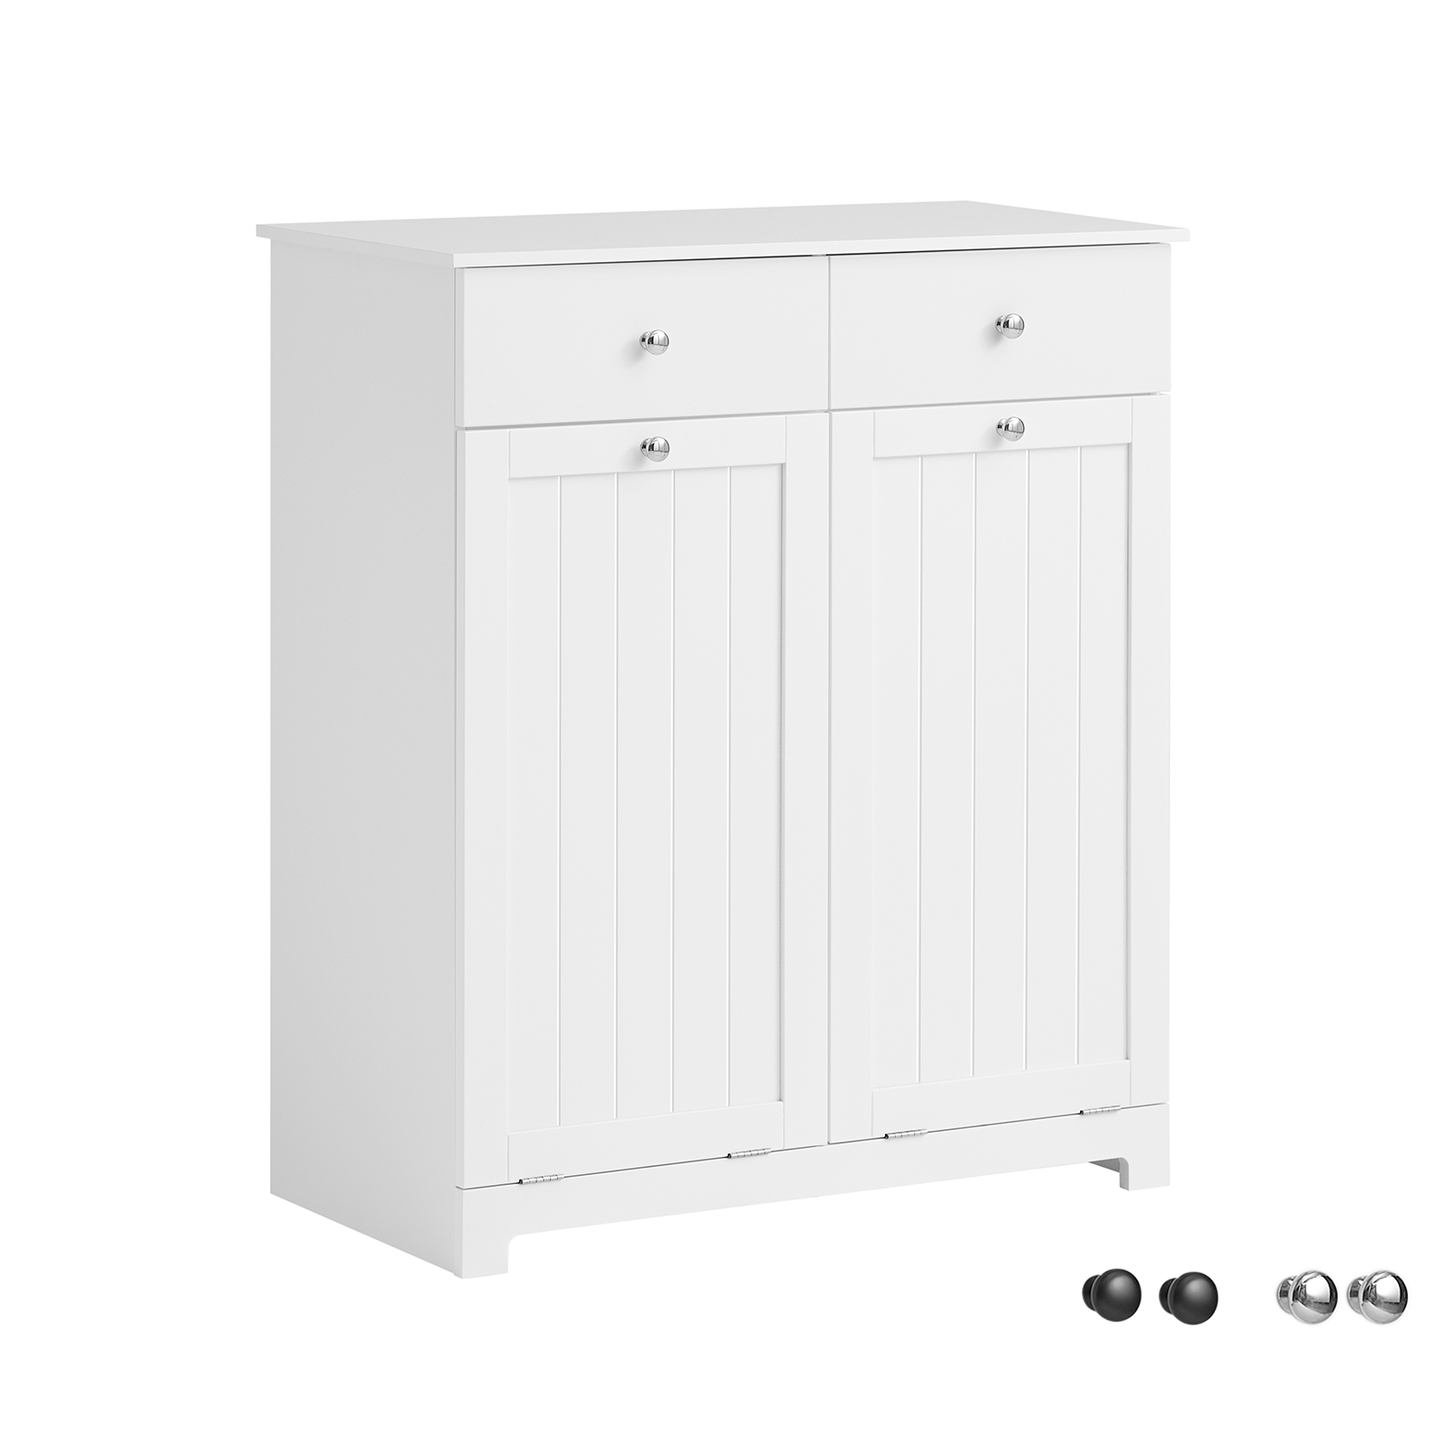 SoBuy 2 Drawers 2 Doors Laundry Cabinet Laundry Chest with 2 Removable Laundry Baskets, Bathroom Cabinet